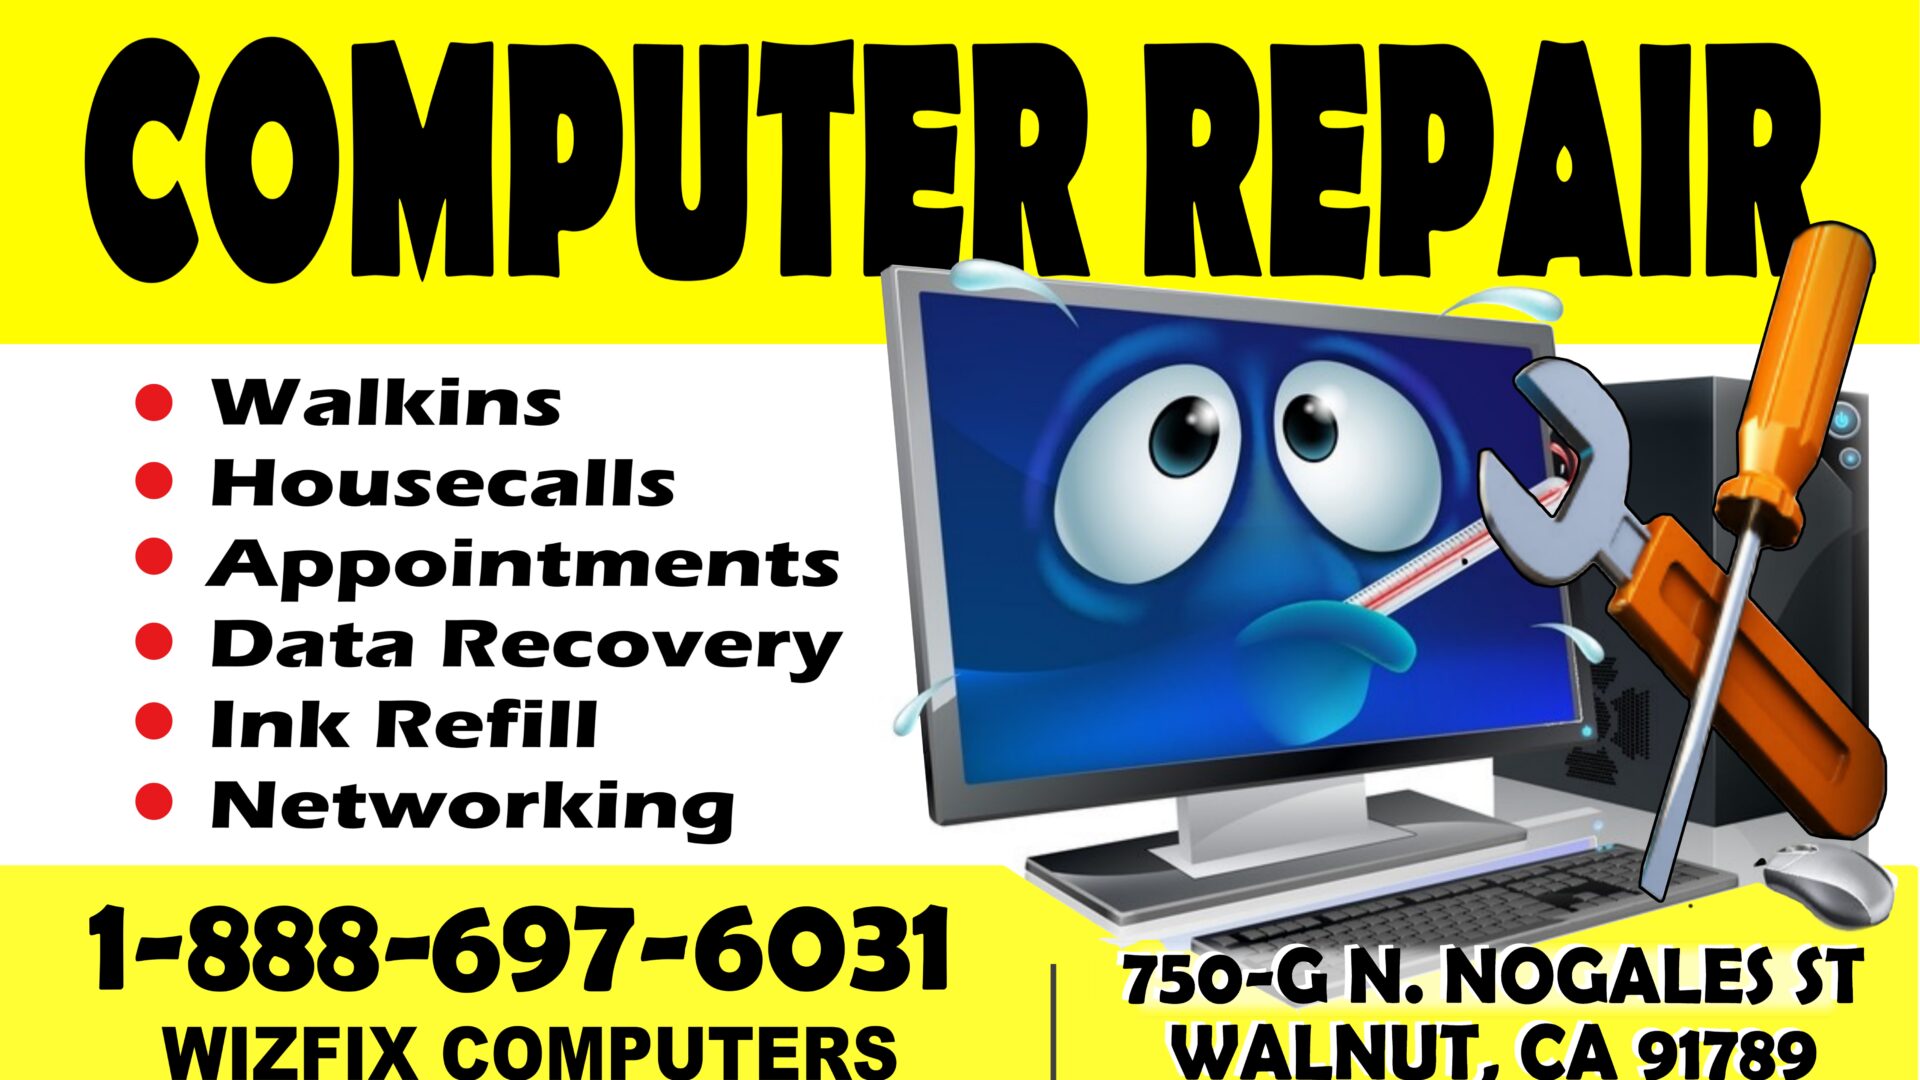 WizFix Computers |Computer Repairs, IT JOBS - DATA RECOVERY , PRINTING, COPY, ONSITE